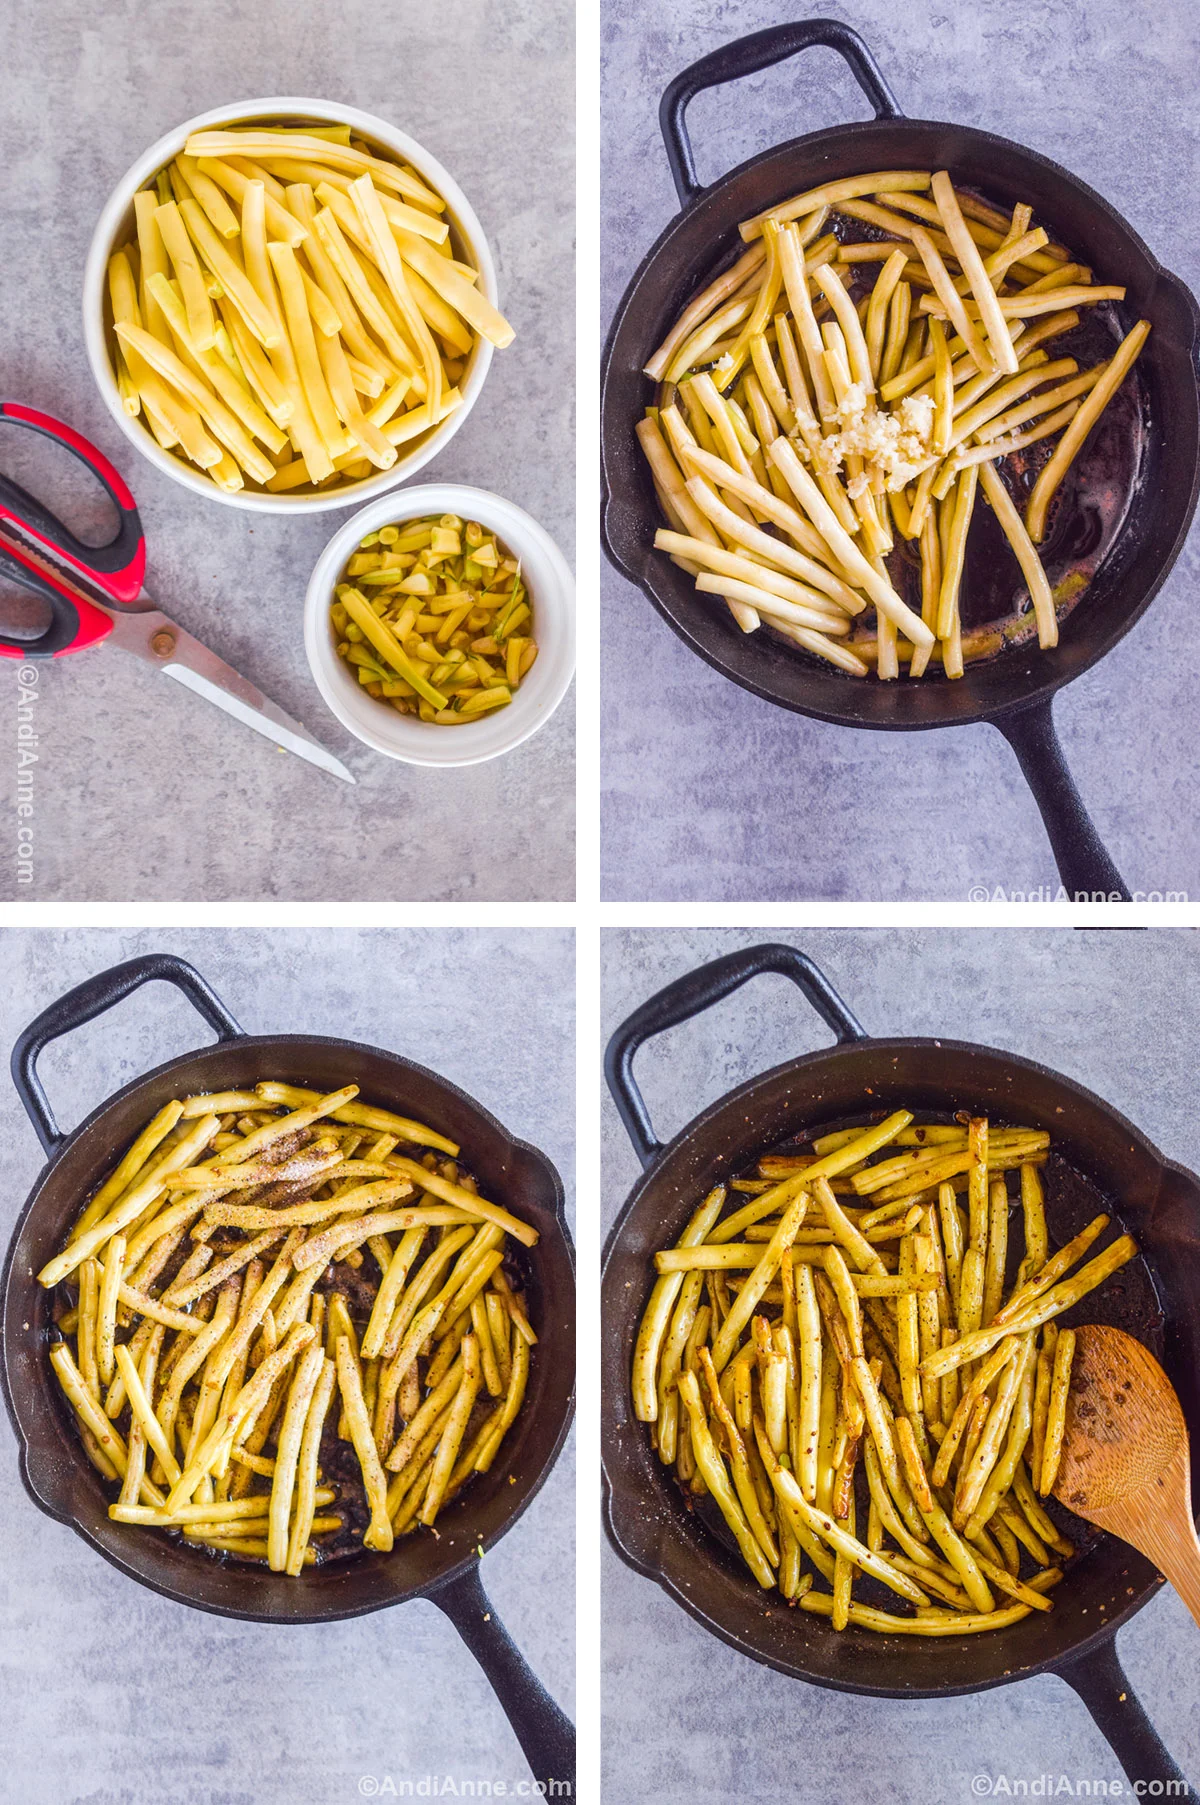 Four images showing various steps to make recipe. First is a bowl of yellow beans, bowl of trimmed edges and a pair of scissors. Second is a black skillet with raw yellow beans and minced garlic dumped on top. Third image is cooking beans with salt and pepper dumped on top. Fourth is cooked yellow beans with golden brown edges and a wood spoon in the black skillet.